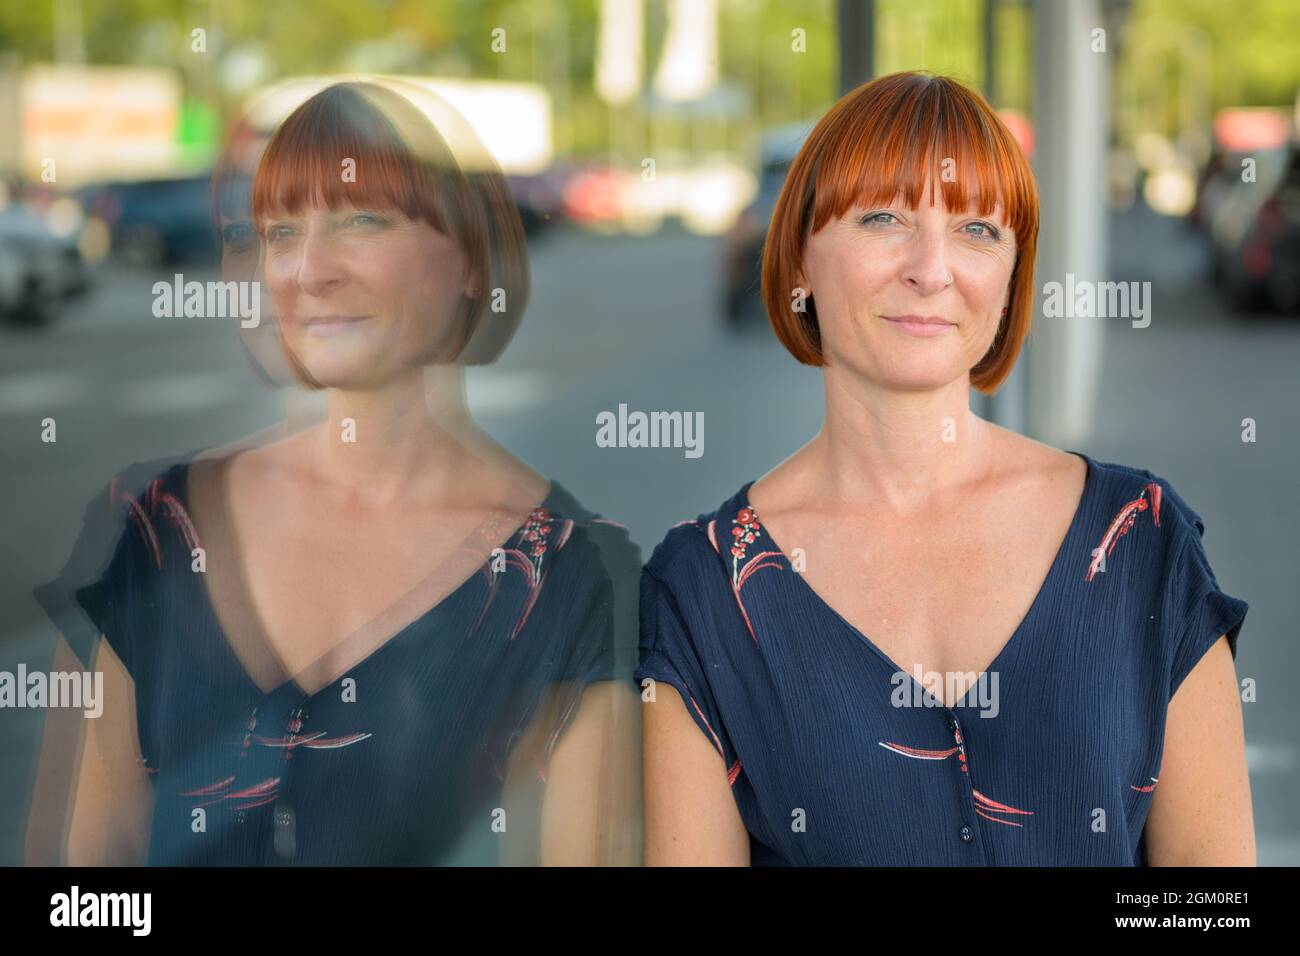 Thoughtful enigmatic woman looking quietly at the camera with a smile as she leans against a large window reflected in the glass in an urban street in Stock Photo